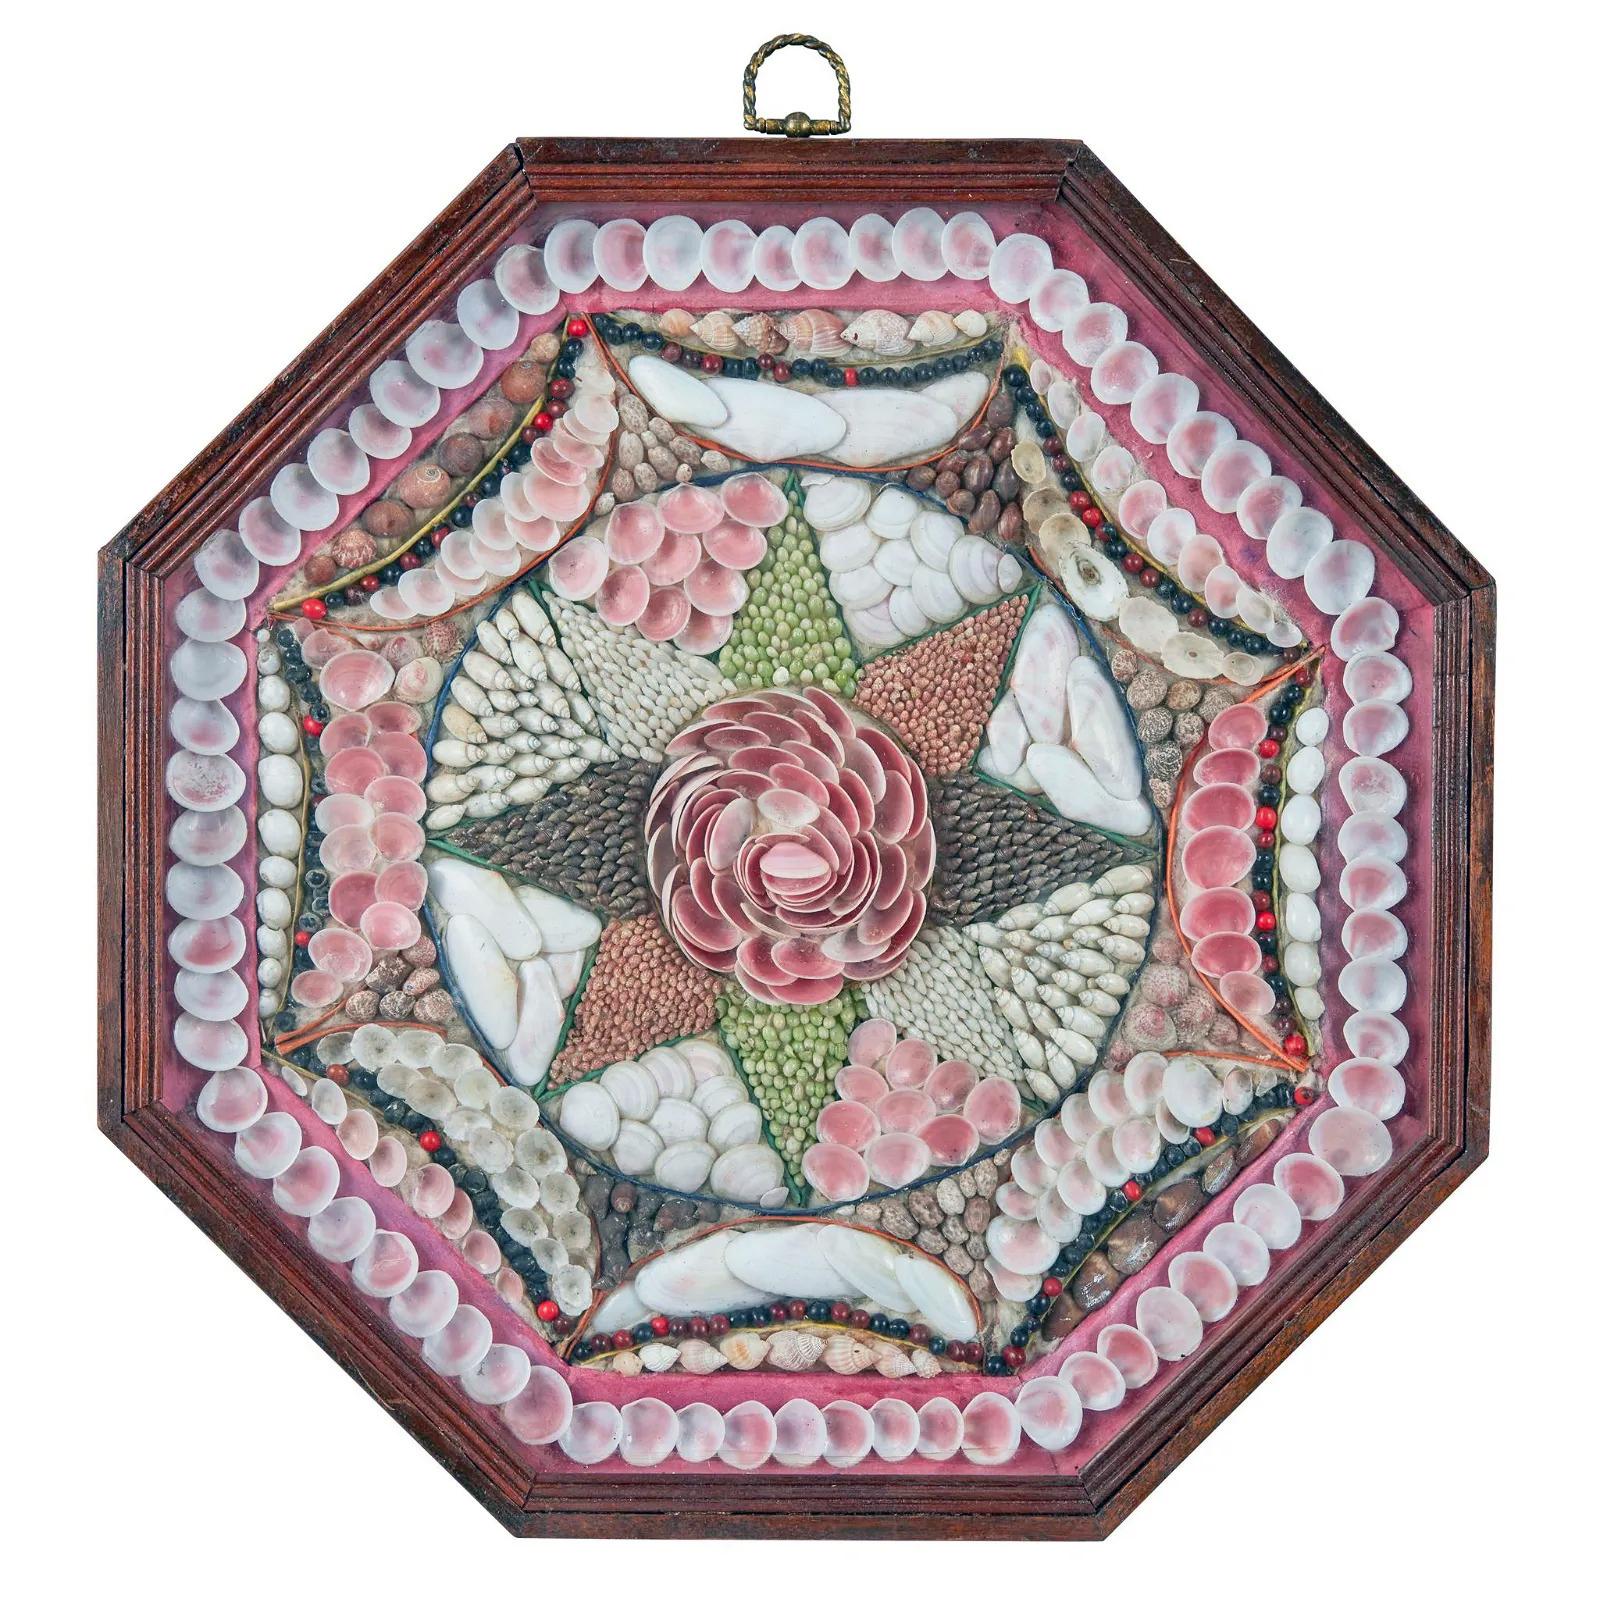 West Indian Sailor's Valentine,
Circa 1880

The large single sailor's valentine is composed of a variety of shells in concentric and geometric patterns, centered with a pink peony enclosed within a pointed star within an octagonal stained wood